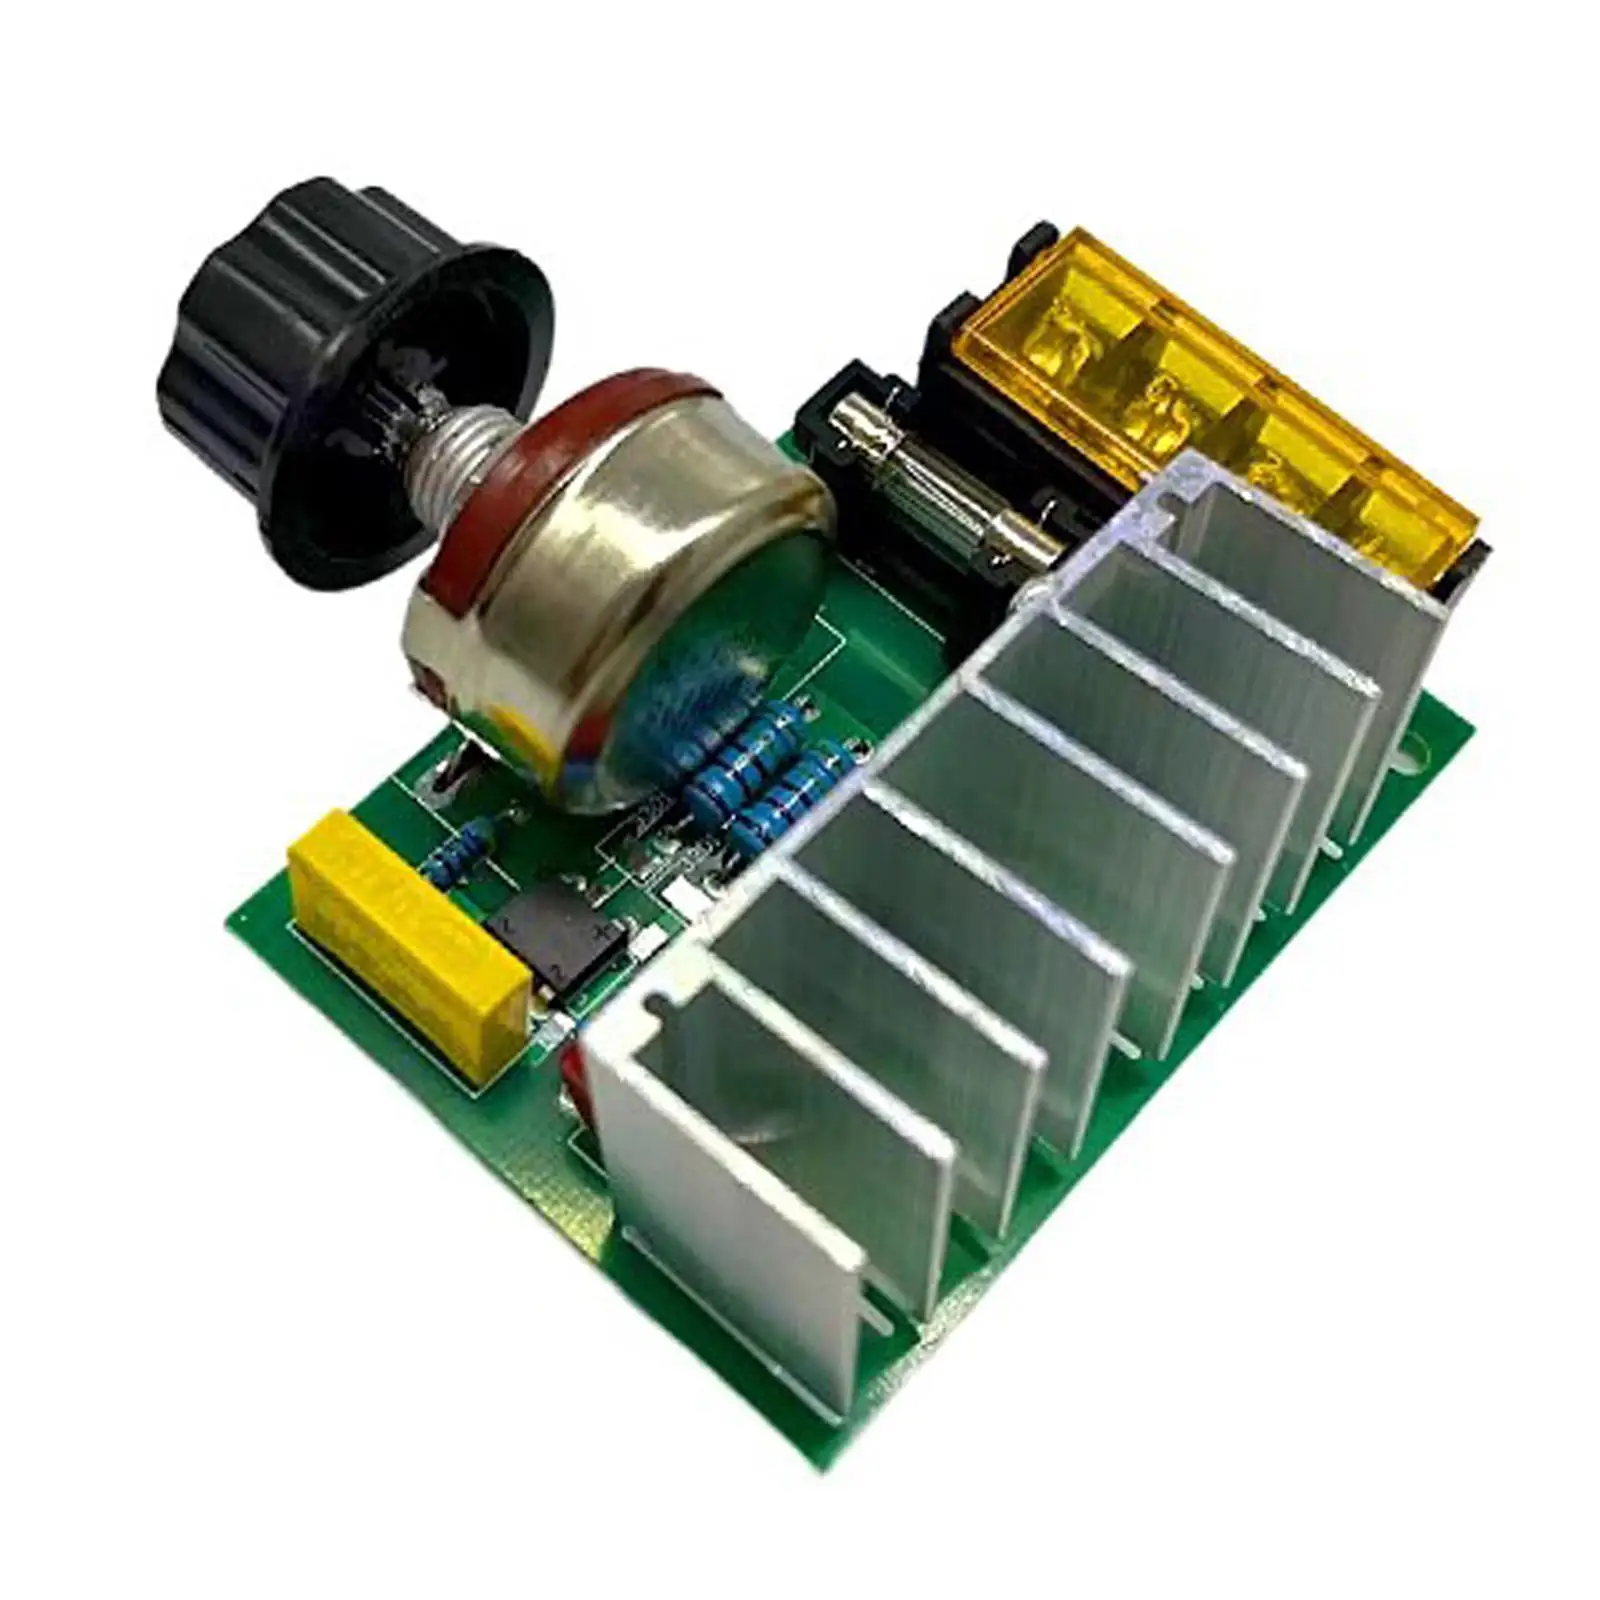 4000W 220V AC Scr Electric Voltage Regulator Professional Large Power Module High Performance Governor Motor Speed Controller